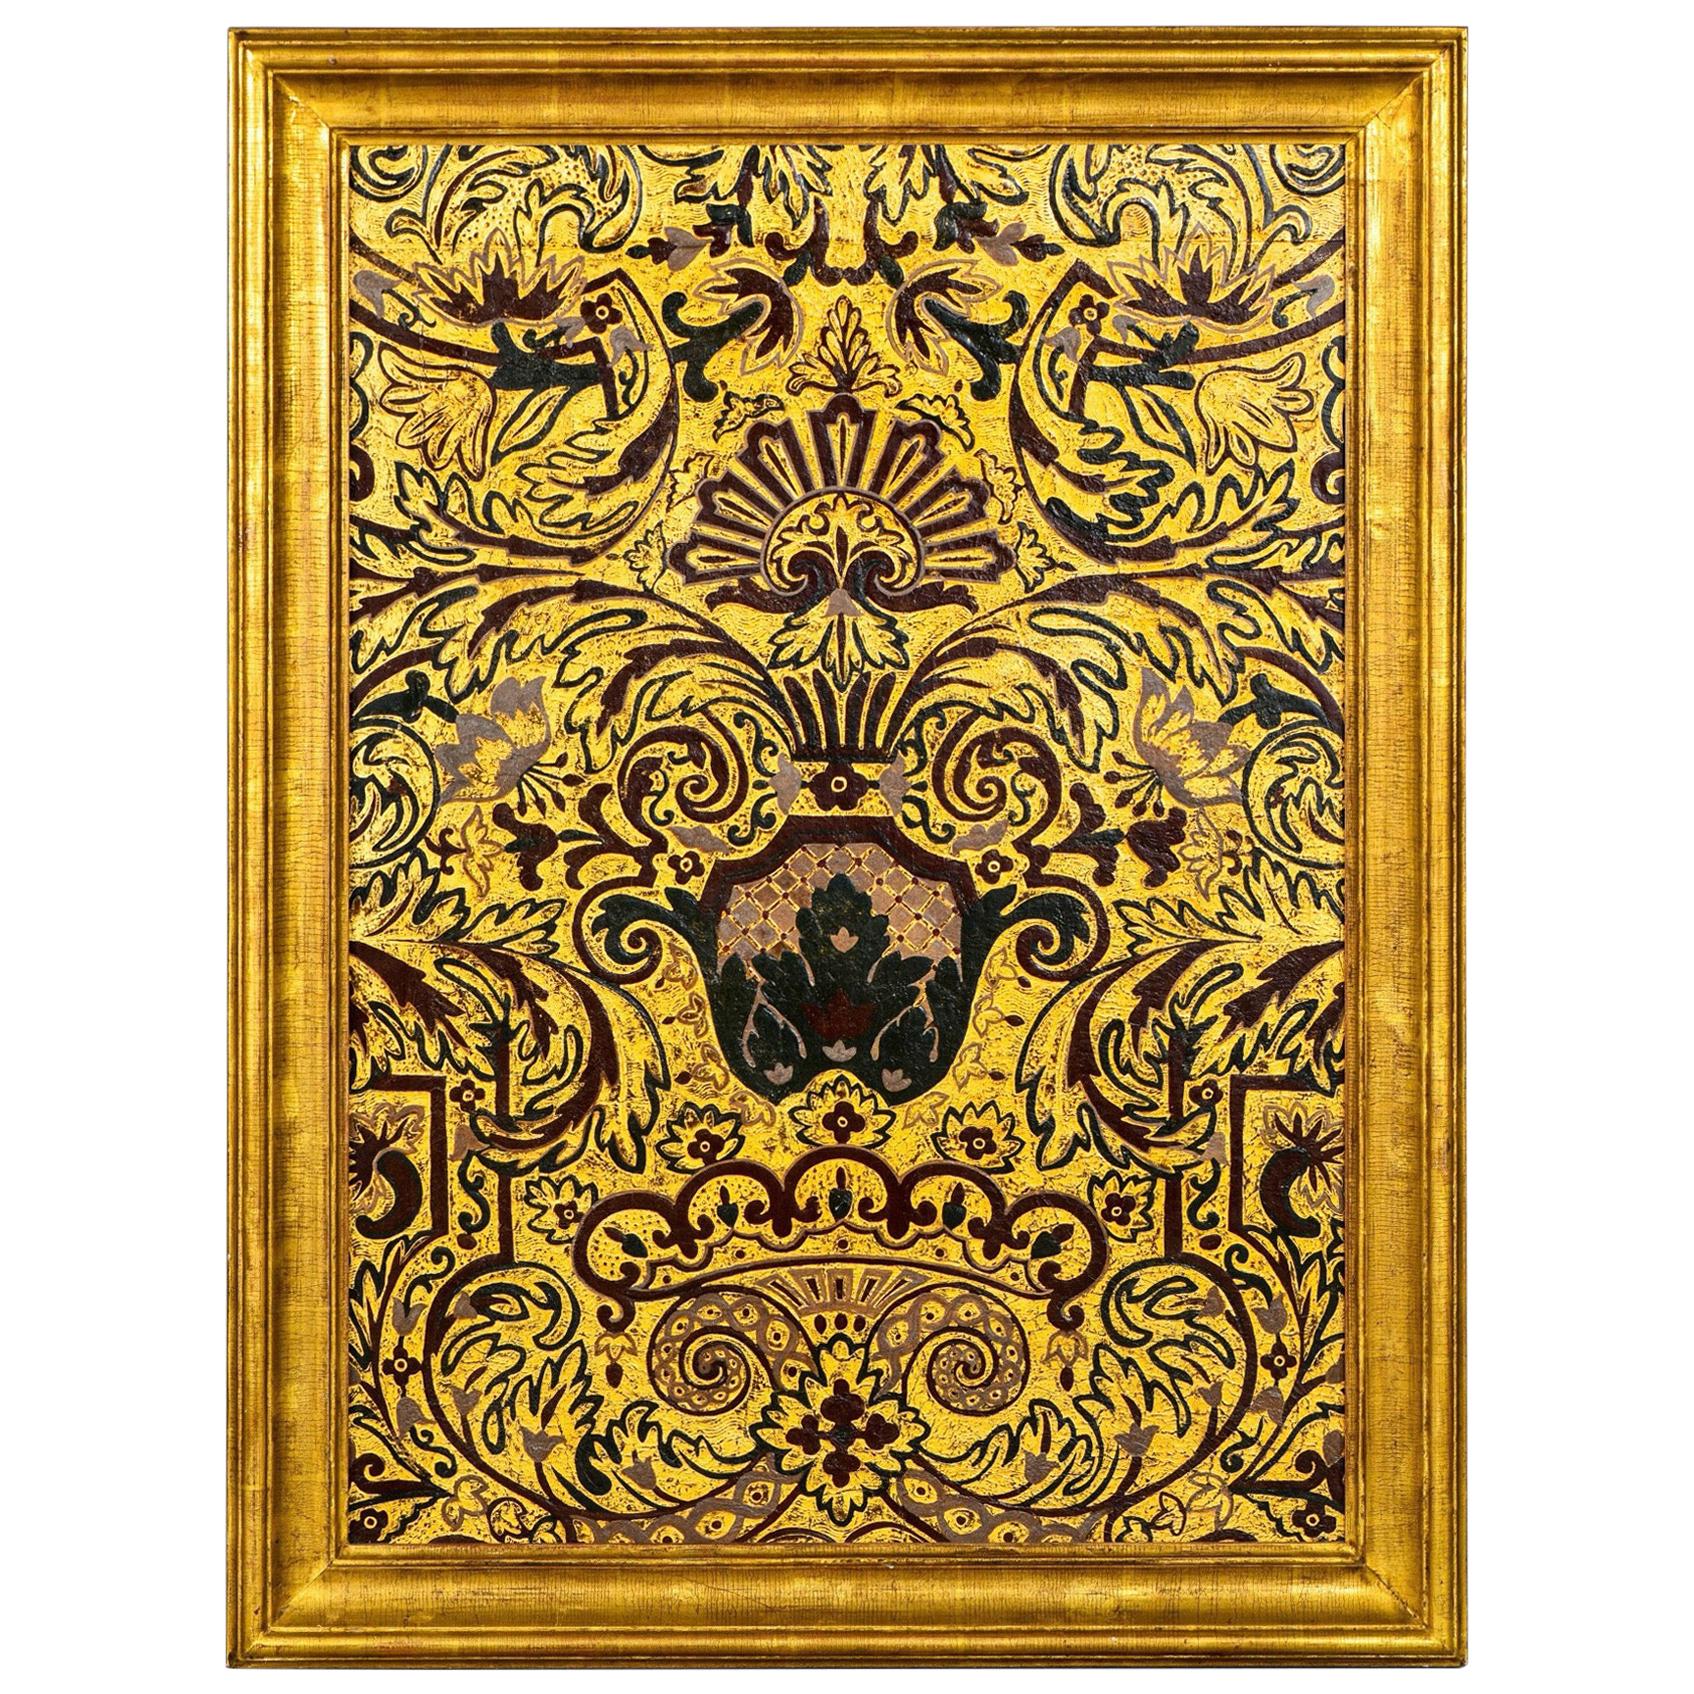 Late 19th Century Italian Painted Leather Panel